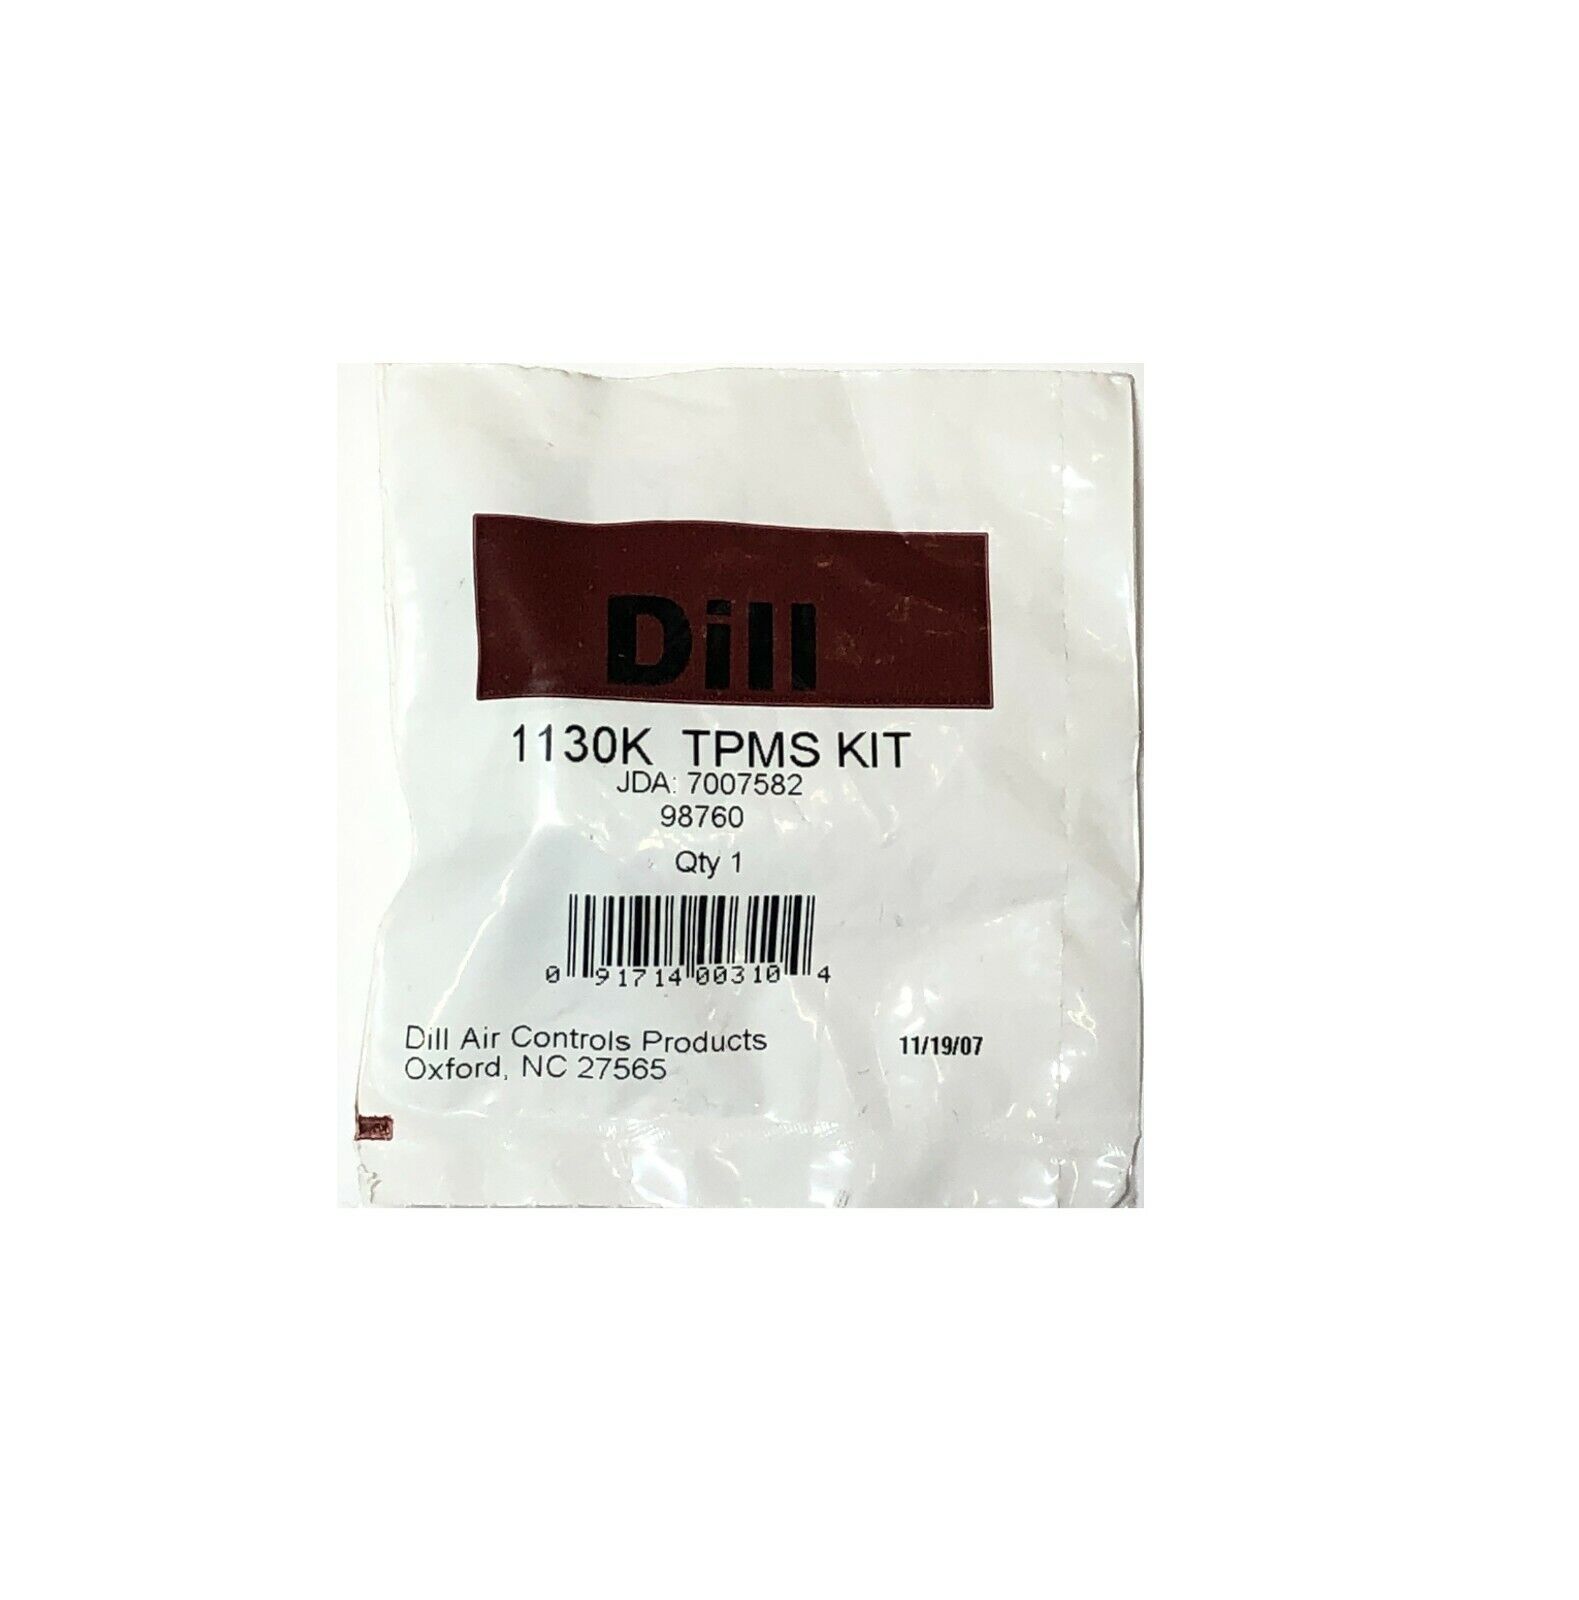 NEW Dill 2010K Service Kit, 4-Pack